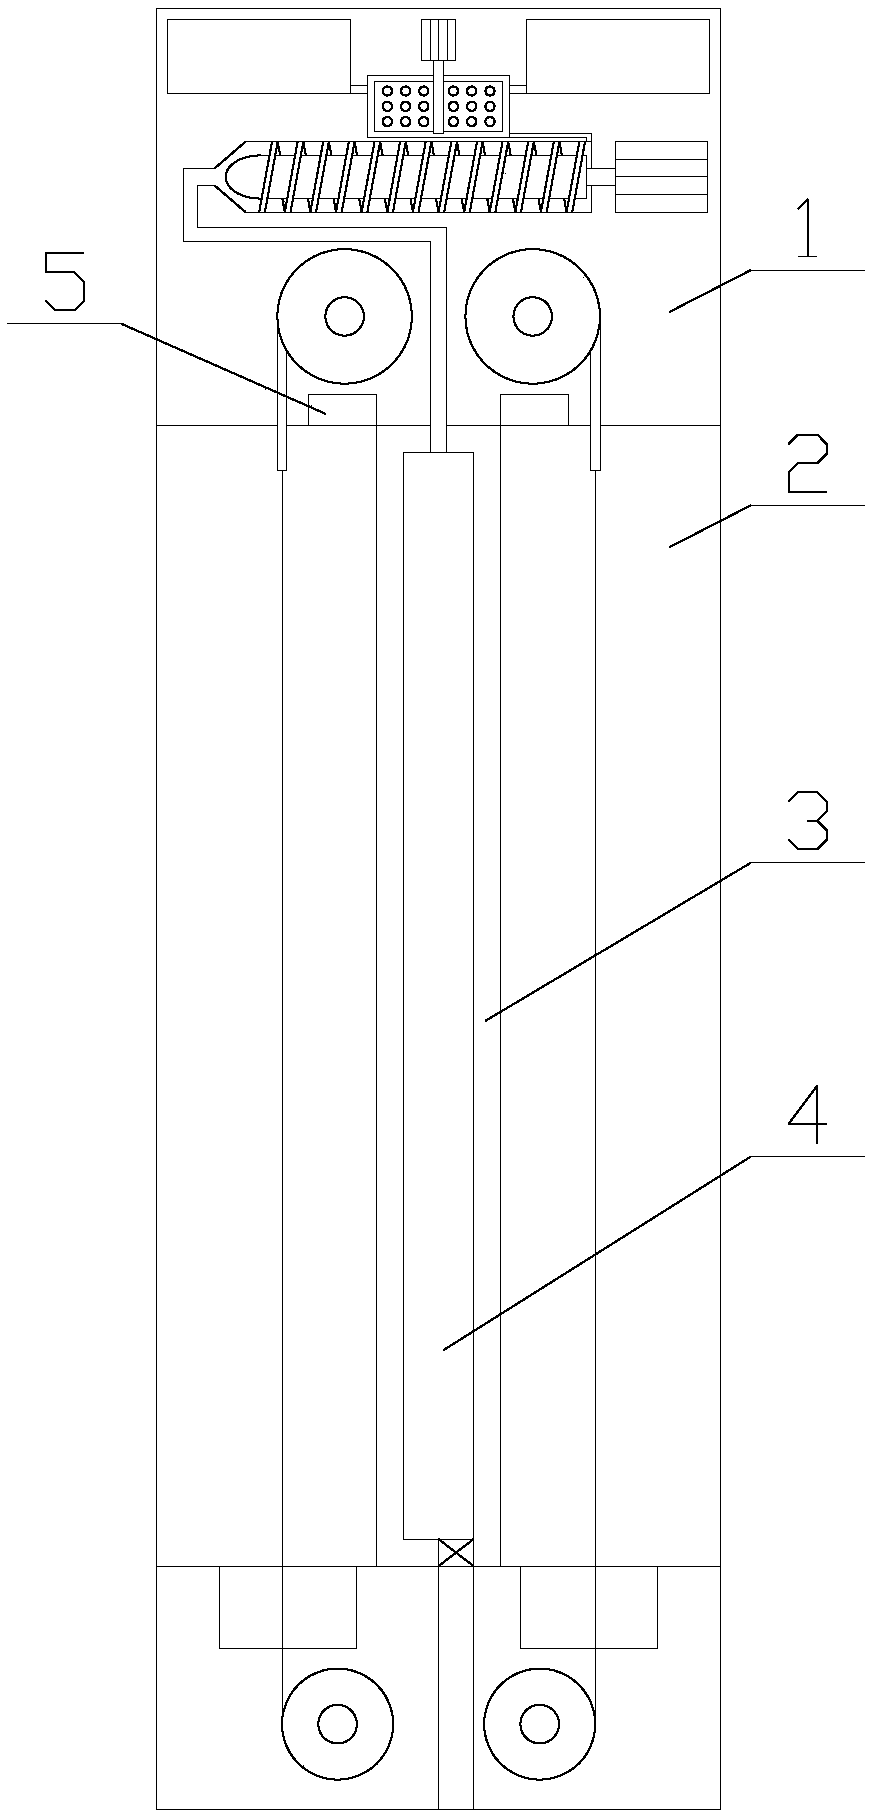 Intelligent window with functions of sound insulation and light blocking